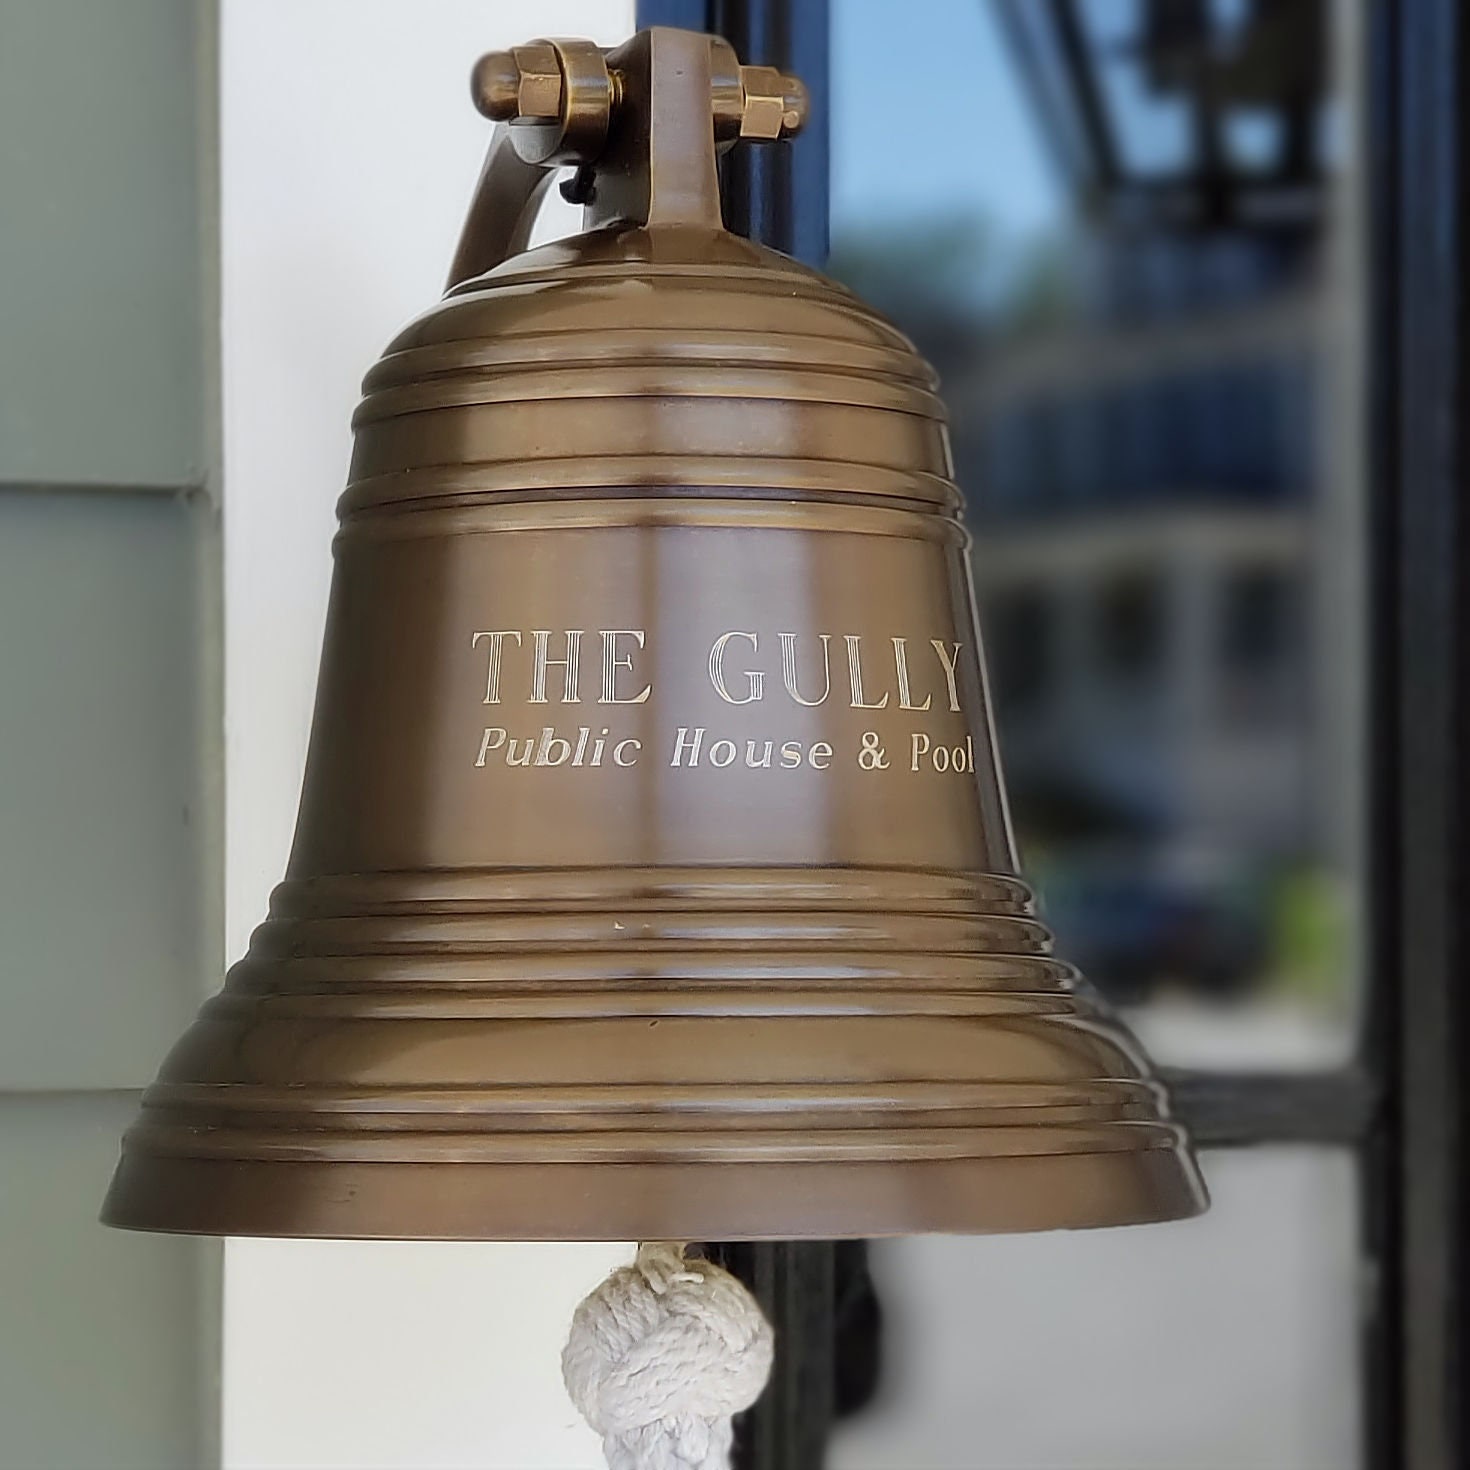 4 Inch Solid Brass Hanging Wall Bell with Rope for Ringing - Fully